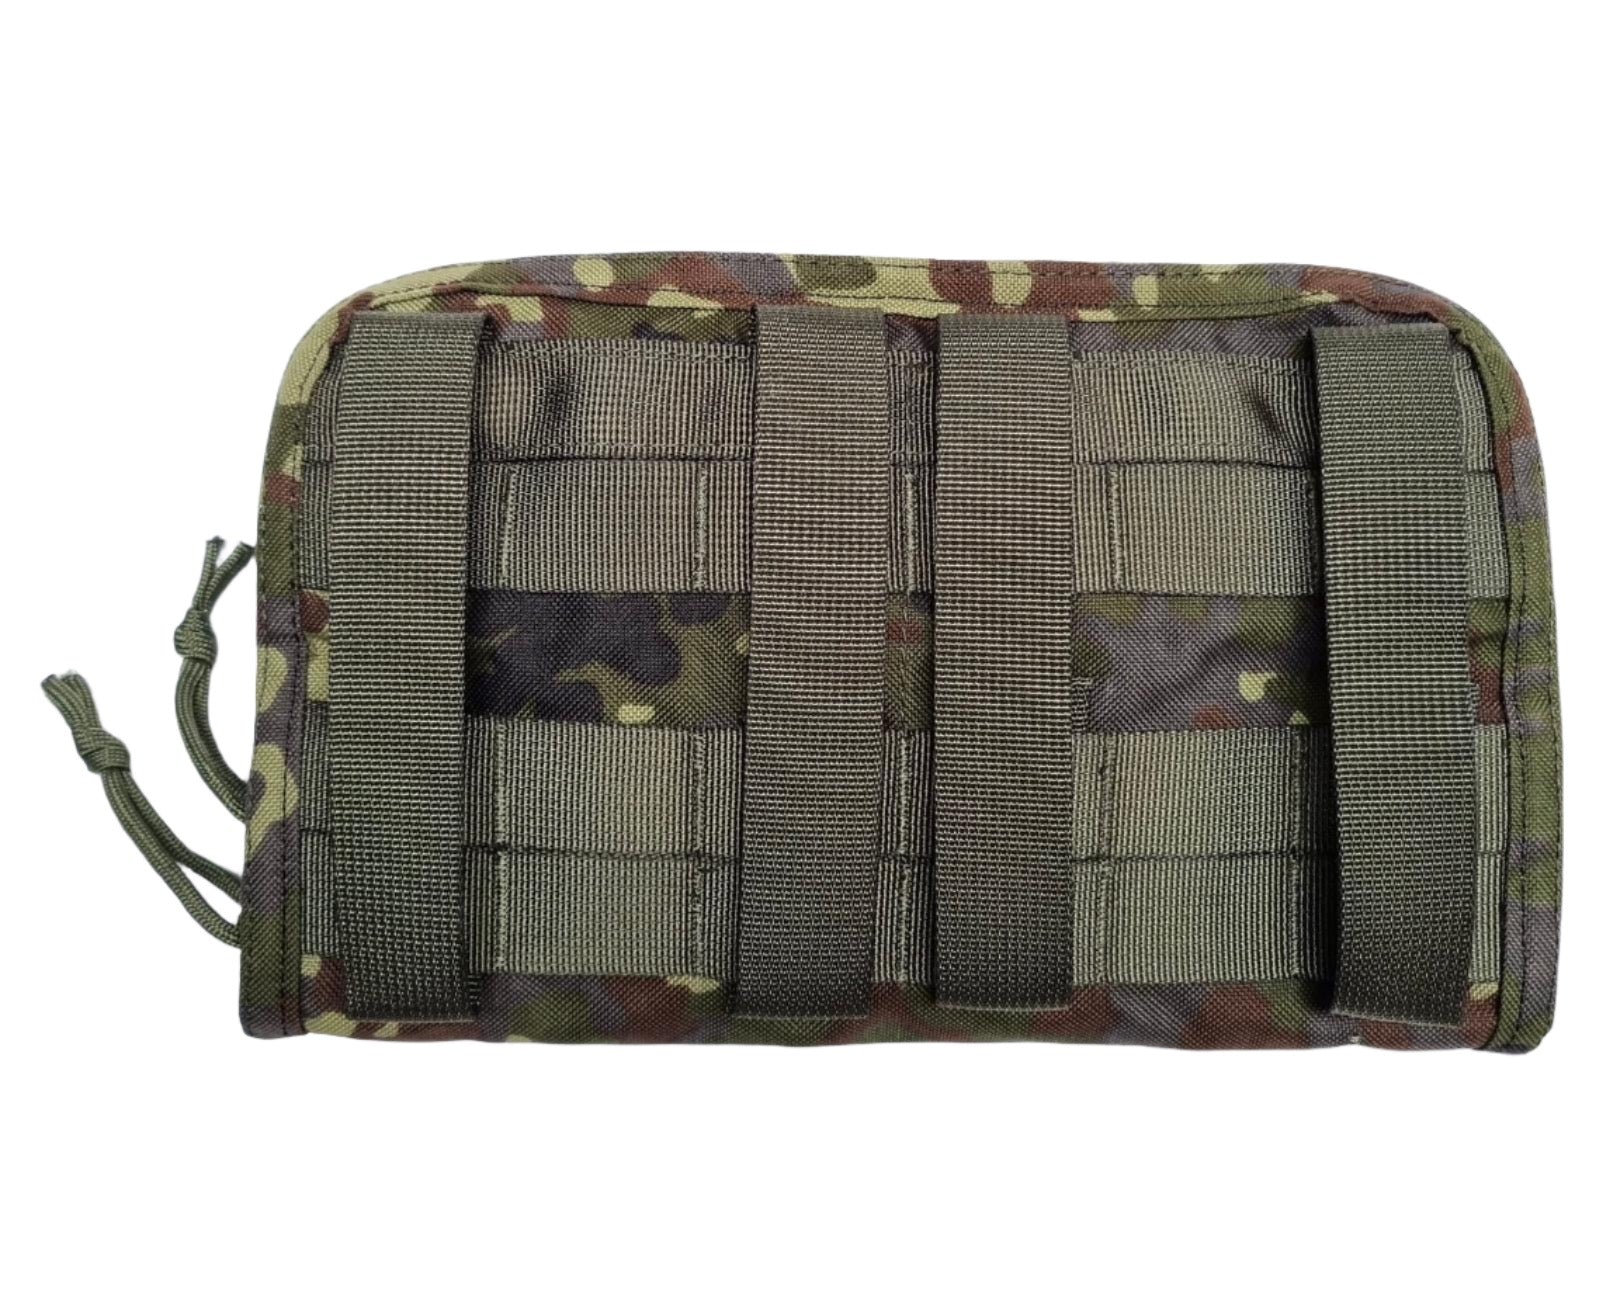 SHE-1044 COMMANDER PANEL / MAP POUCH COLOUR FLECTARN